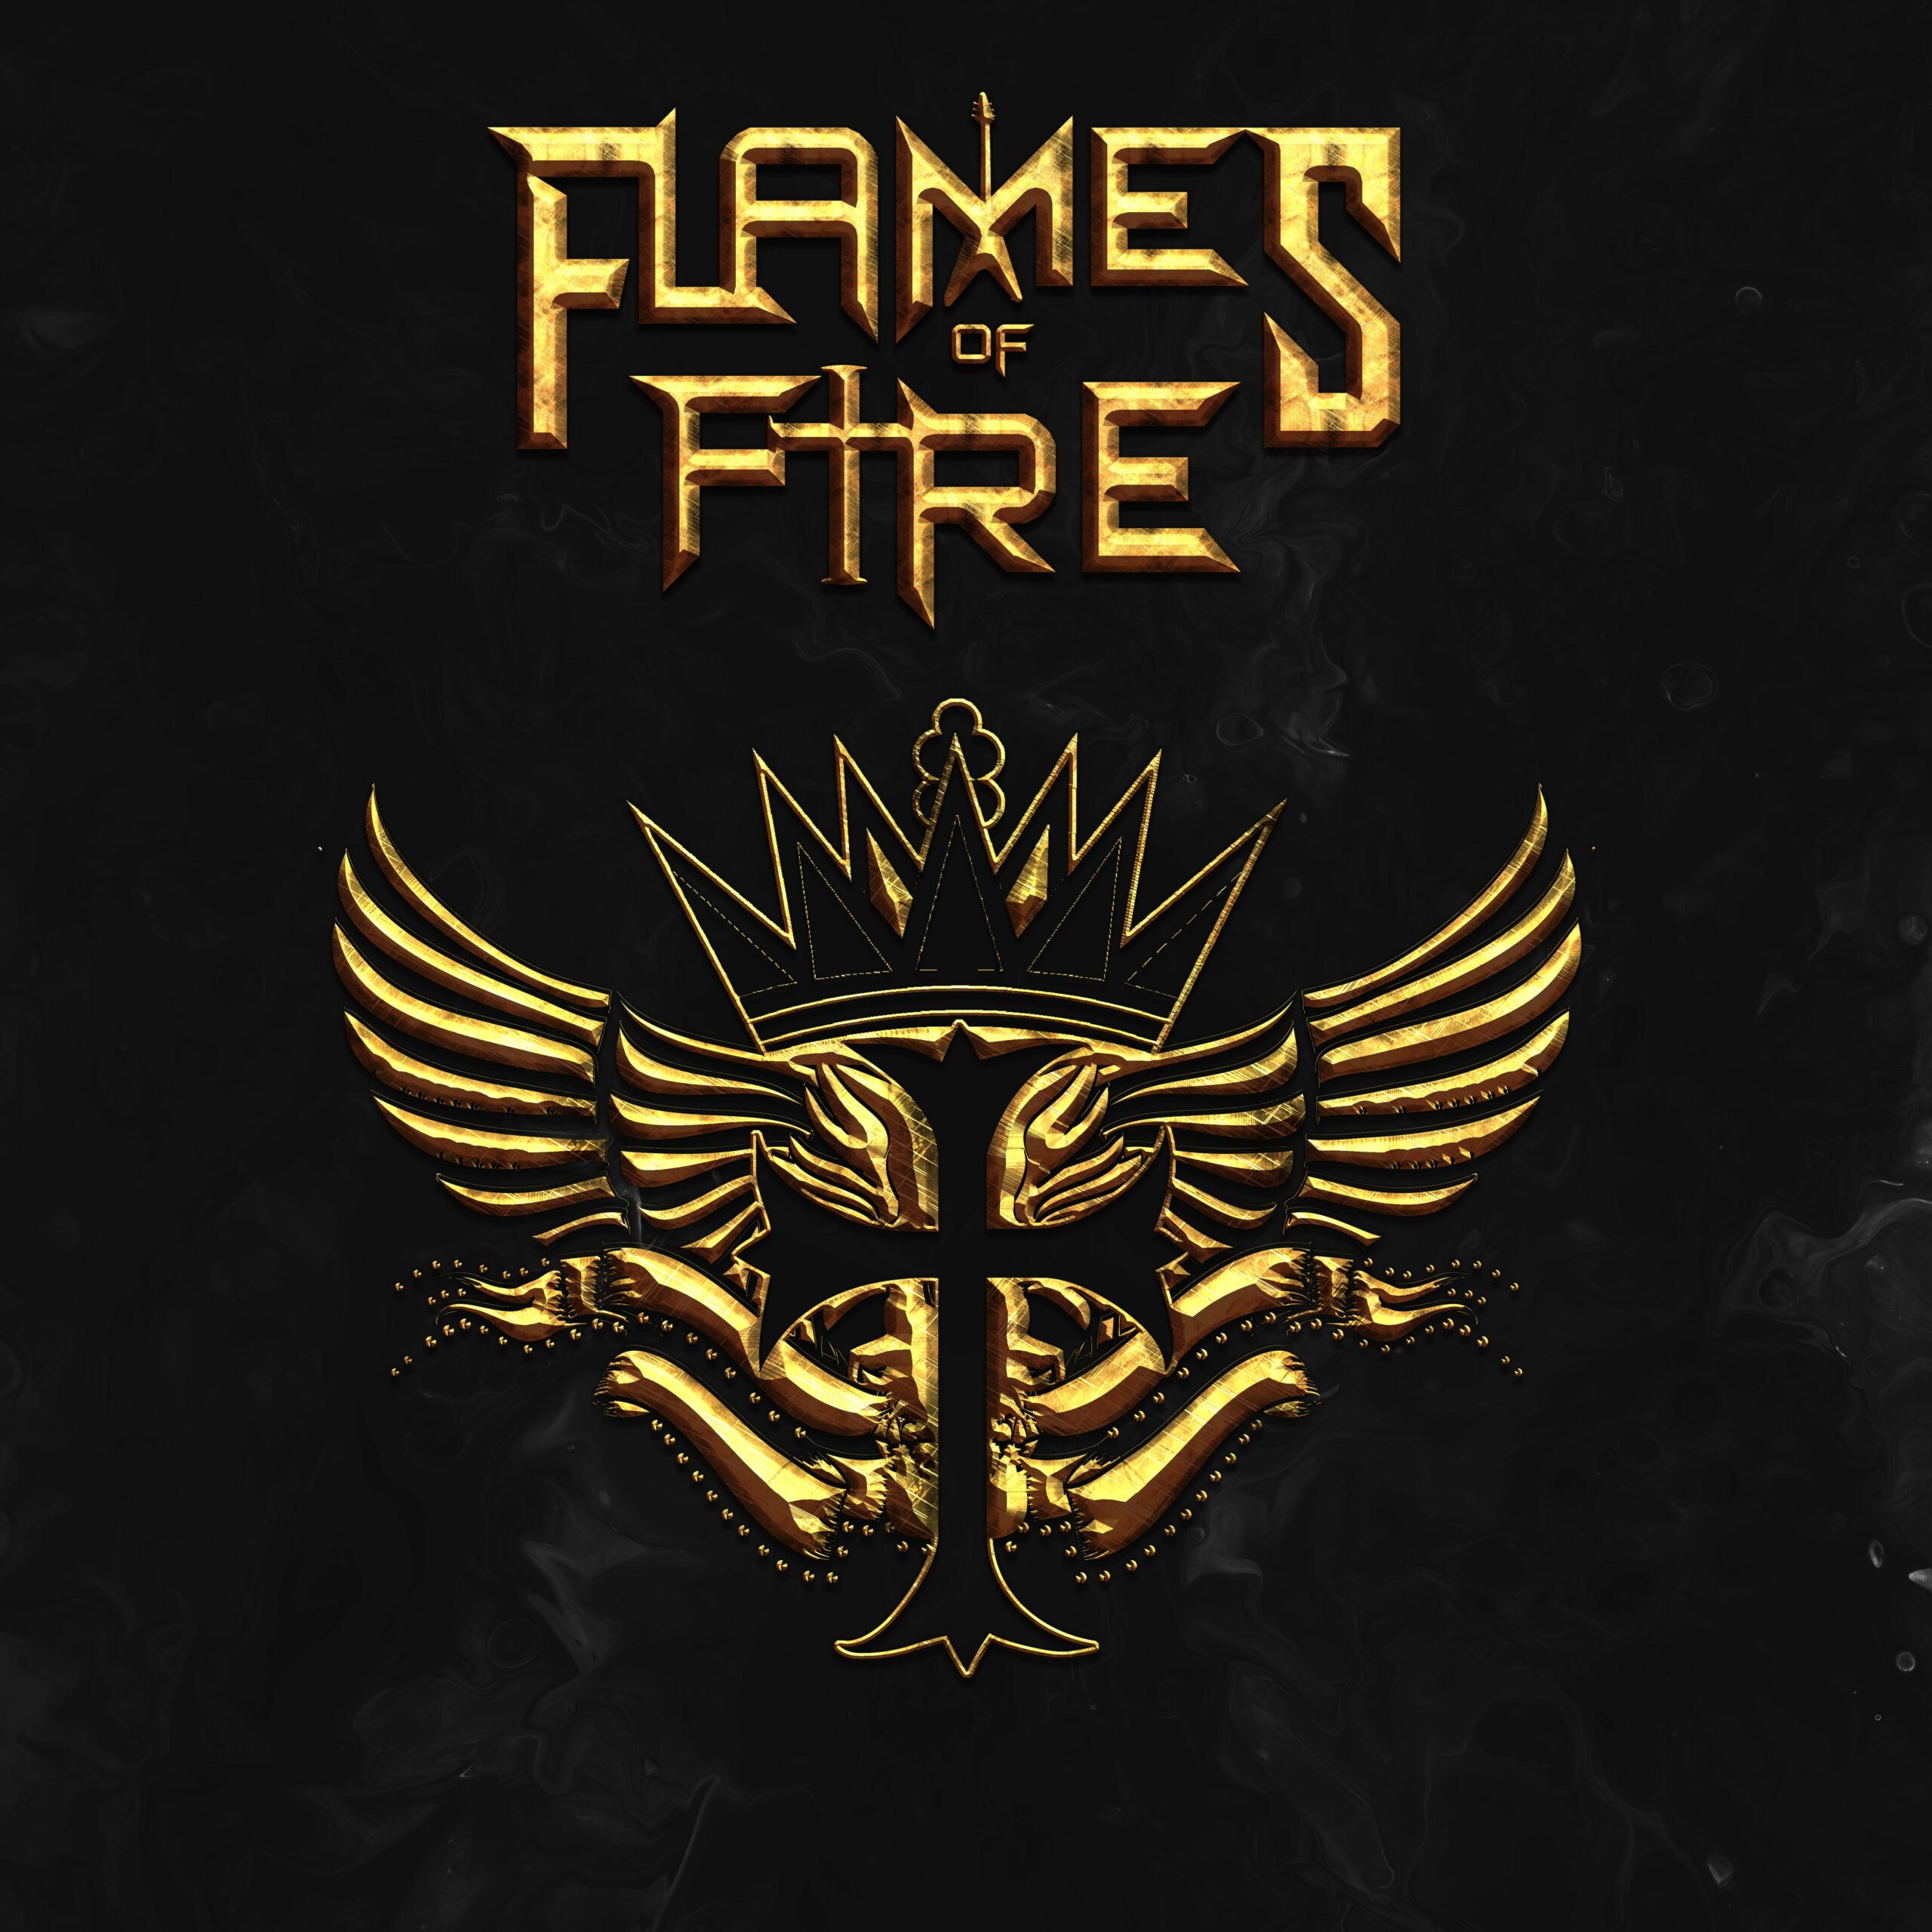 Flames Of Fire (S/FI/NOR) – Flames Of Fire